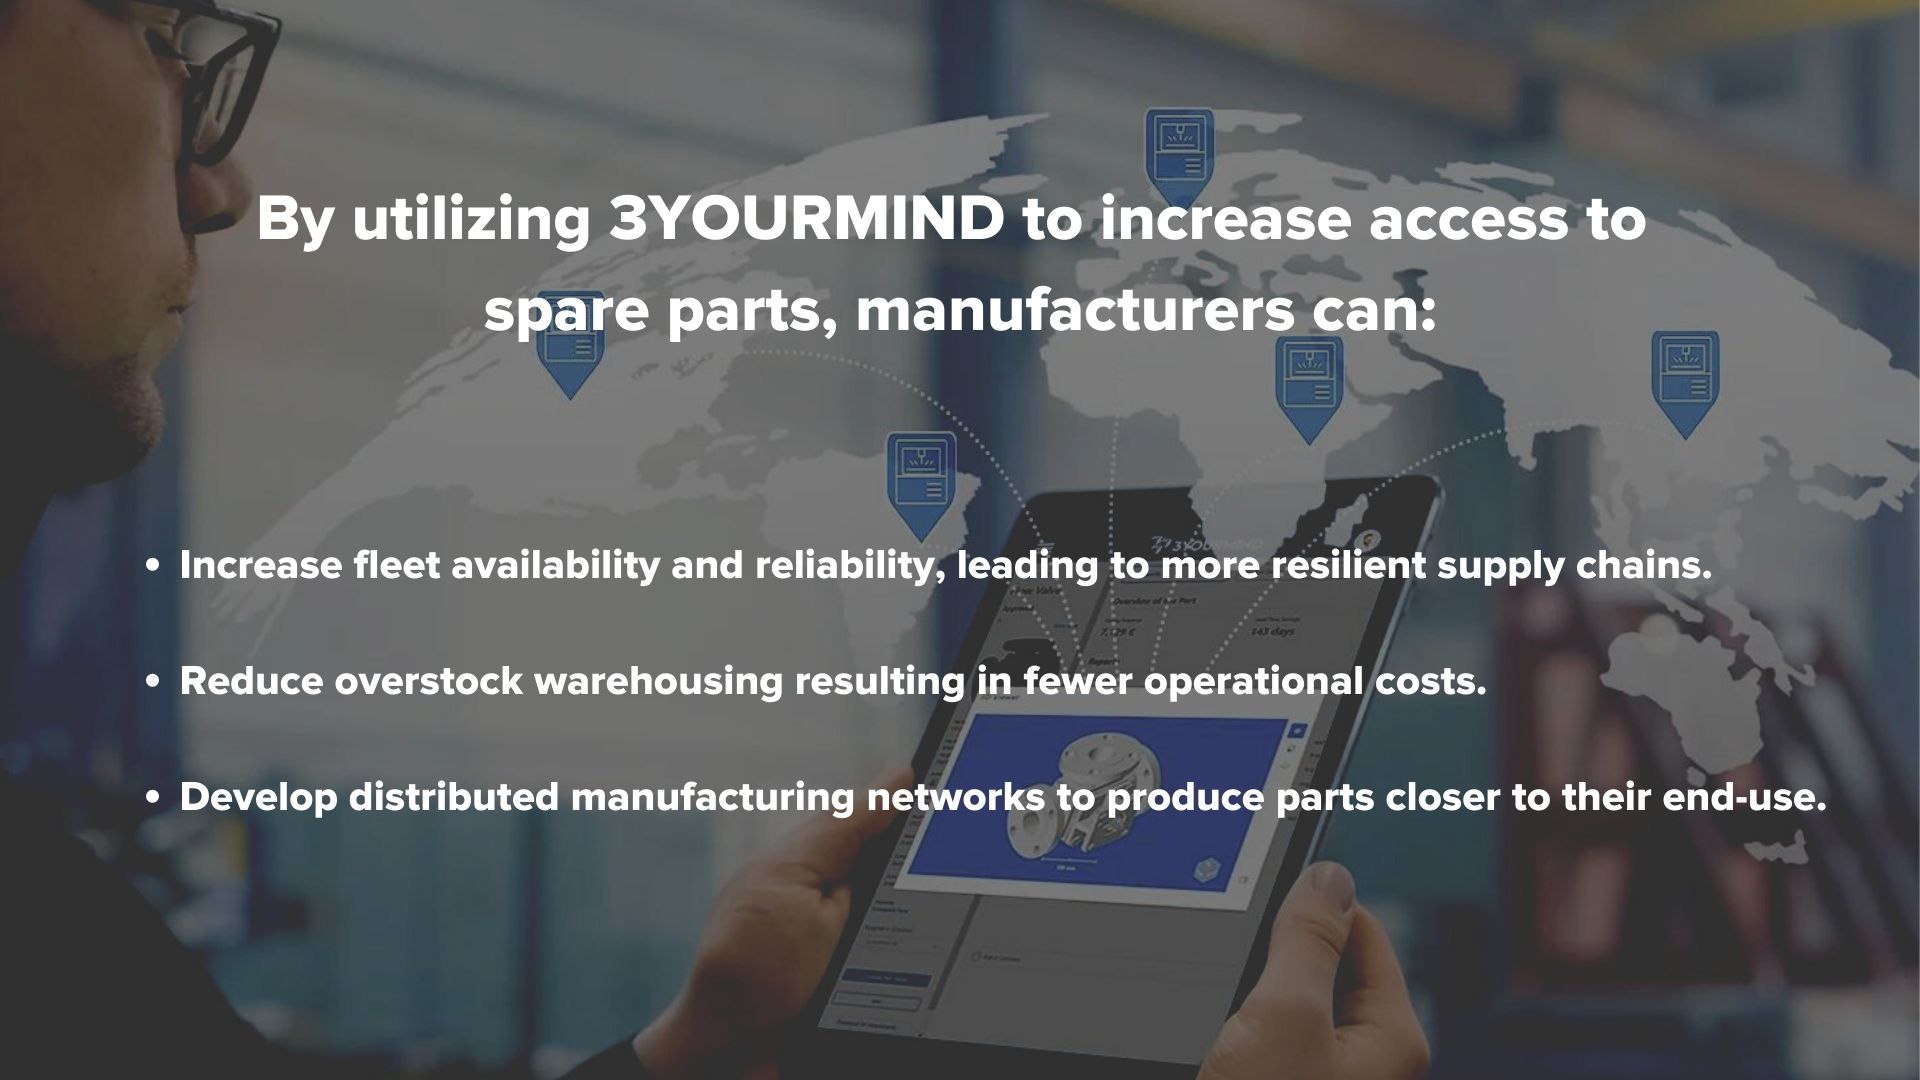 Photo Description: Man holding tablet looking at 3YOURMIND part software. Image text: By utilizing 3YOURMIND to increase access to  spare parts, manufacturers can: - Increase fleet availability and reliability, leading to more resilient supply chains.  - Reduce overstock warehousing resulting in fewer operational costs.  - Develop distributed manufacturing networks to produce parts closer to their end-use.